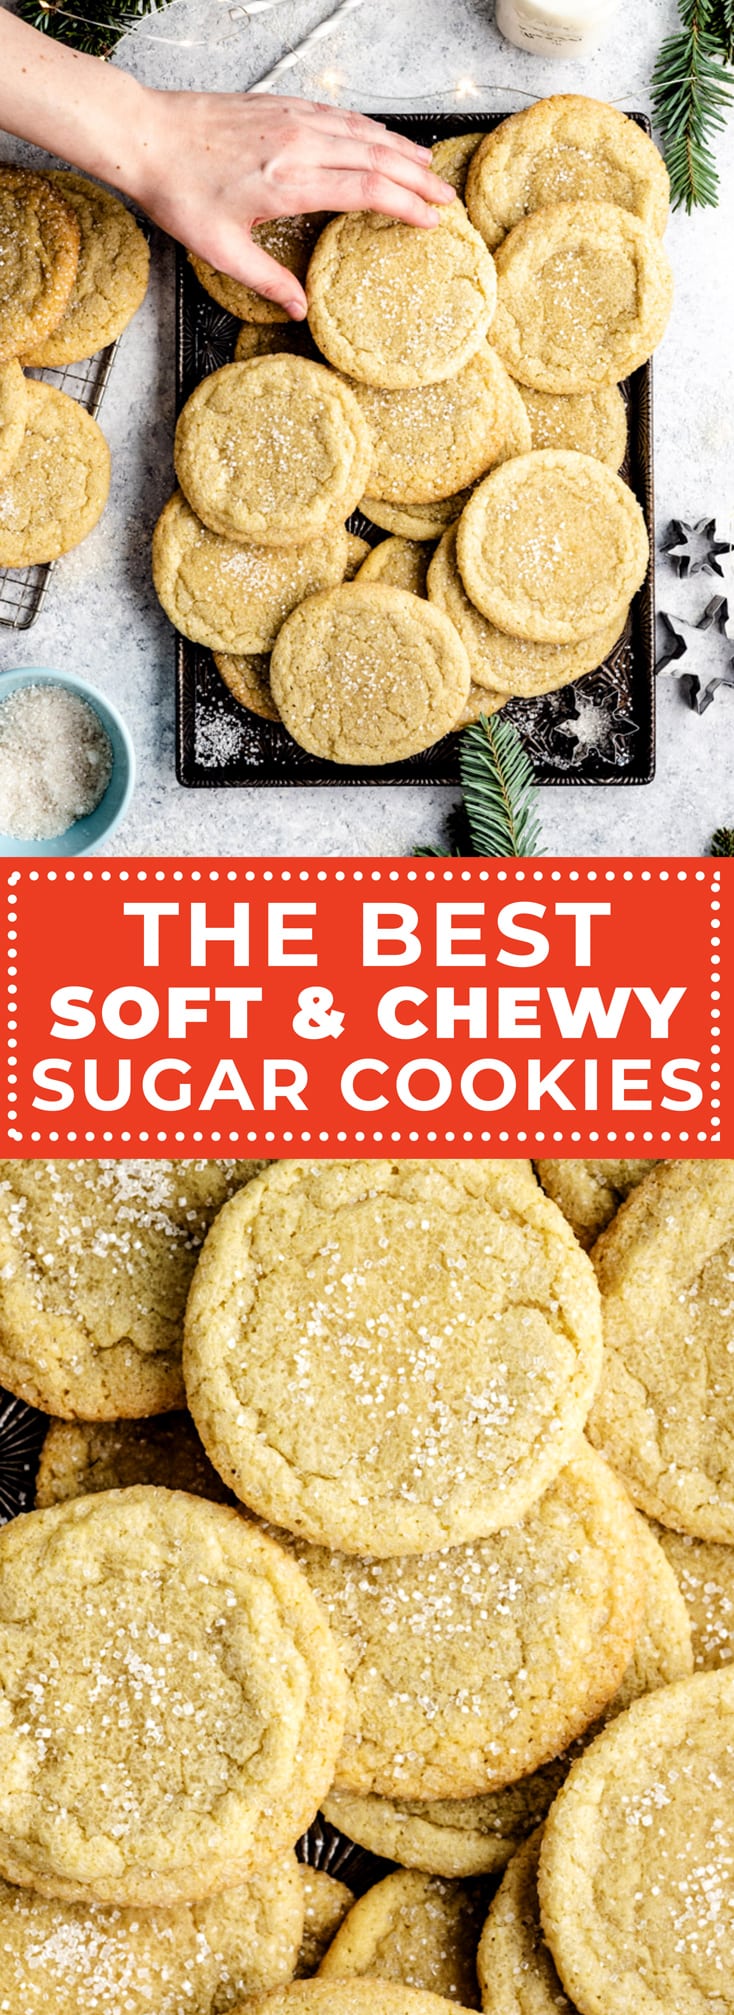 If you’re looking for the ultimate recipe for soft and chewy sugar cookies, you’ve come to the right place. Not only are these sugar cookies fantastically buttery, tender, and doughy; but they also stay soft for days on end. They’re also incredibly easy to make and require no rolling out! | hostthetoast.com